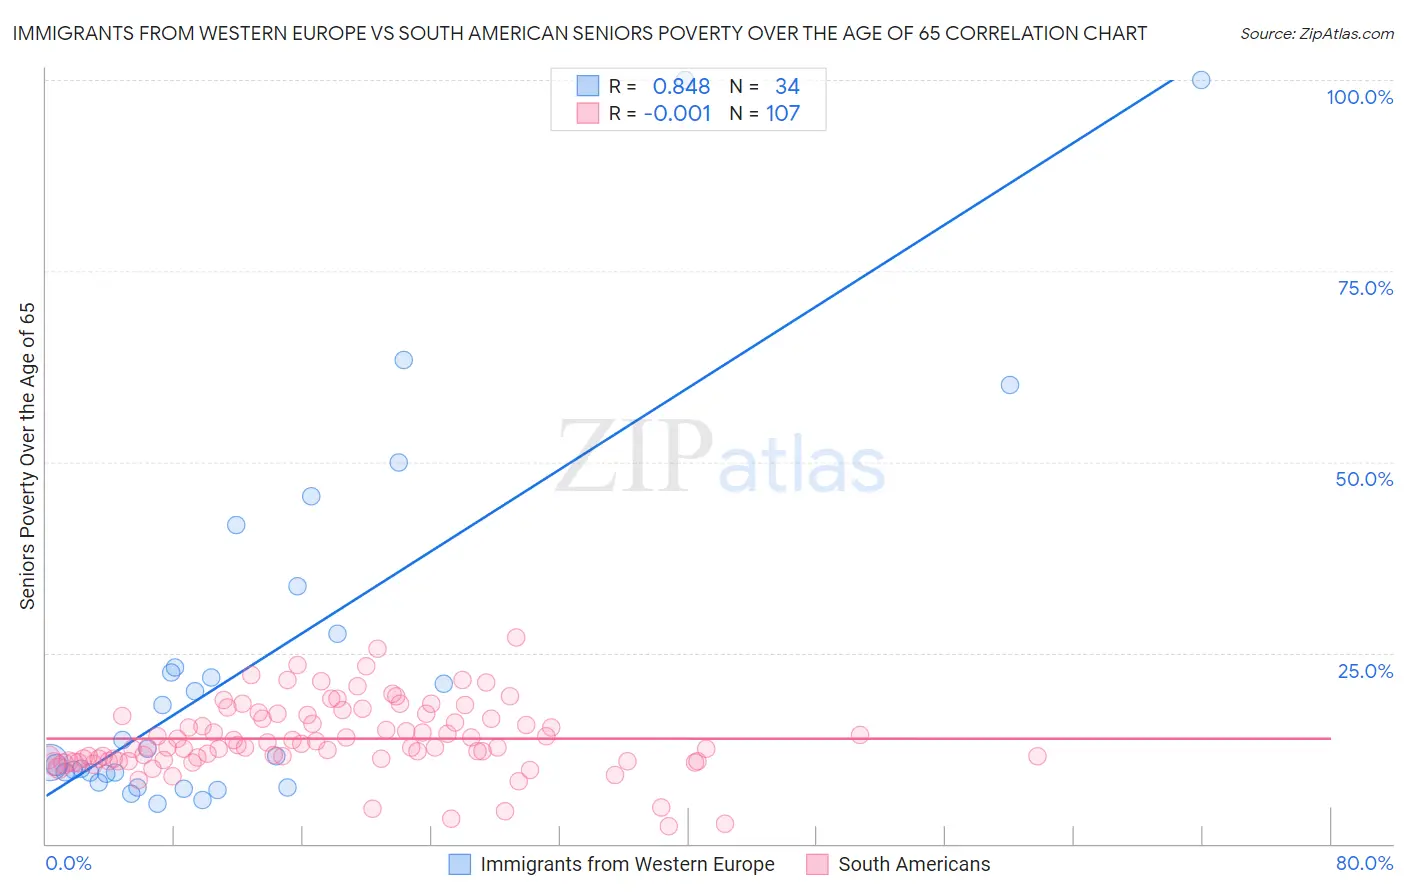 Immigrants from Western Europe vs South American Seniors Poverty Over the Age of 65